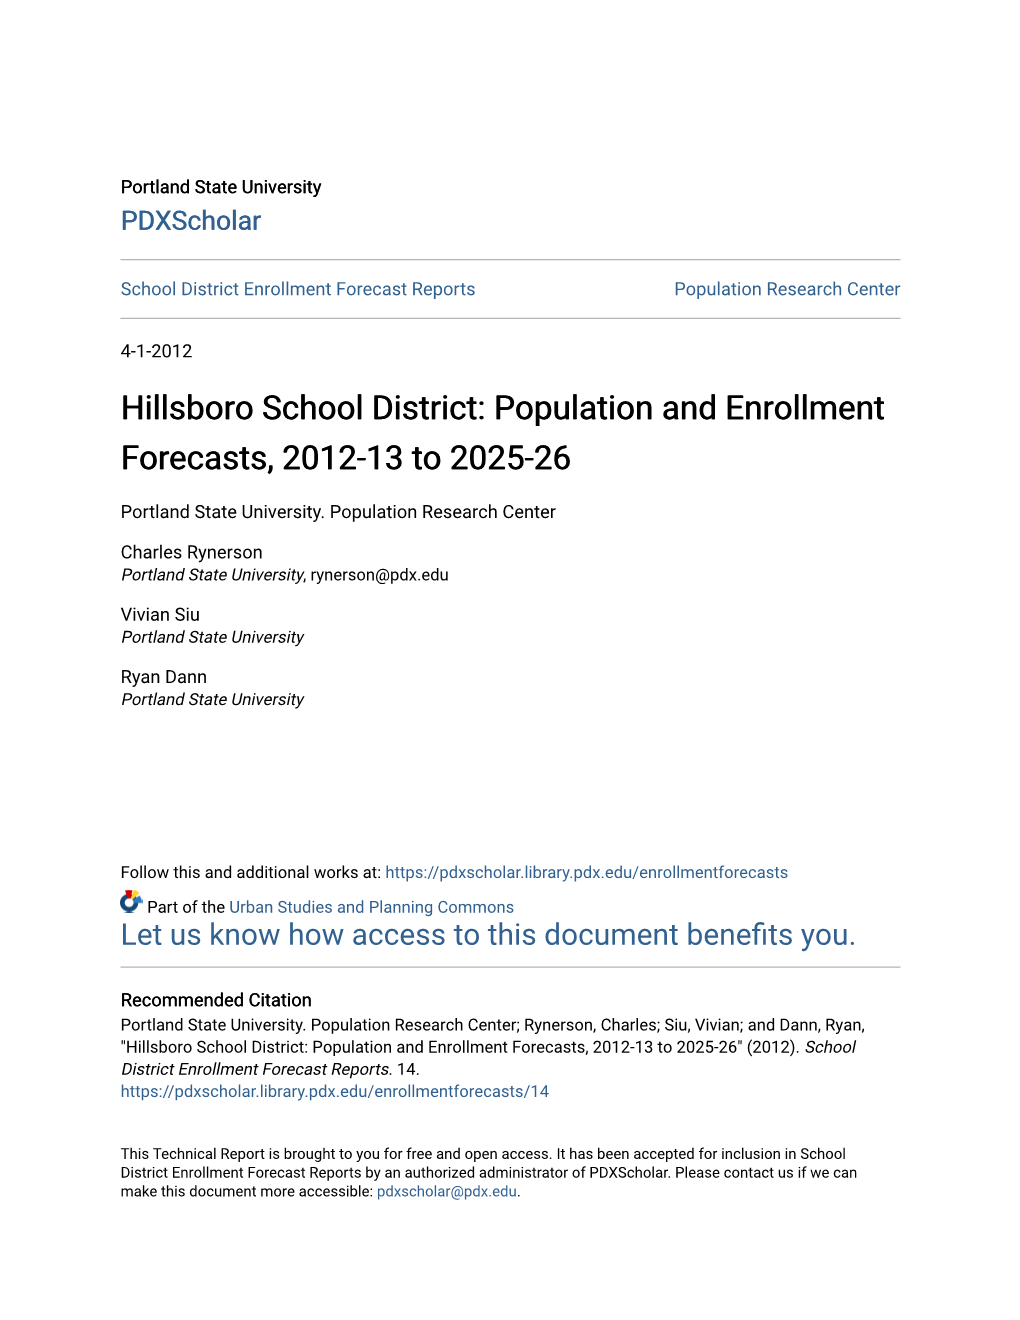 Hillsboro School District: Population and Enrollment Forecasts, 2012-13 to 2025-26